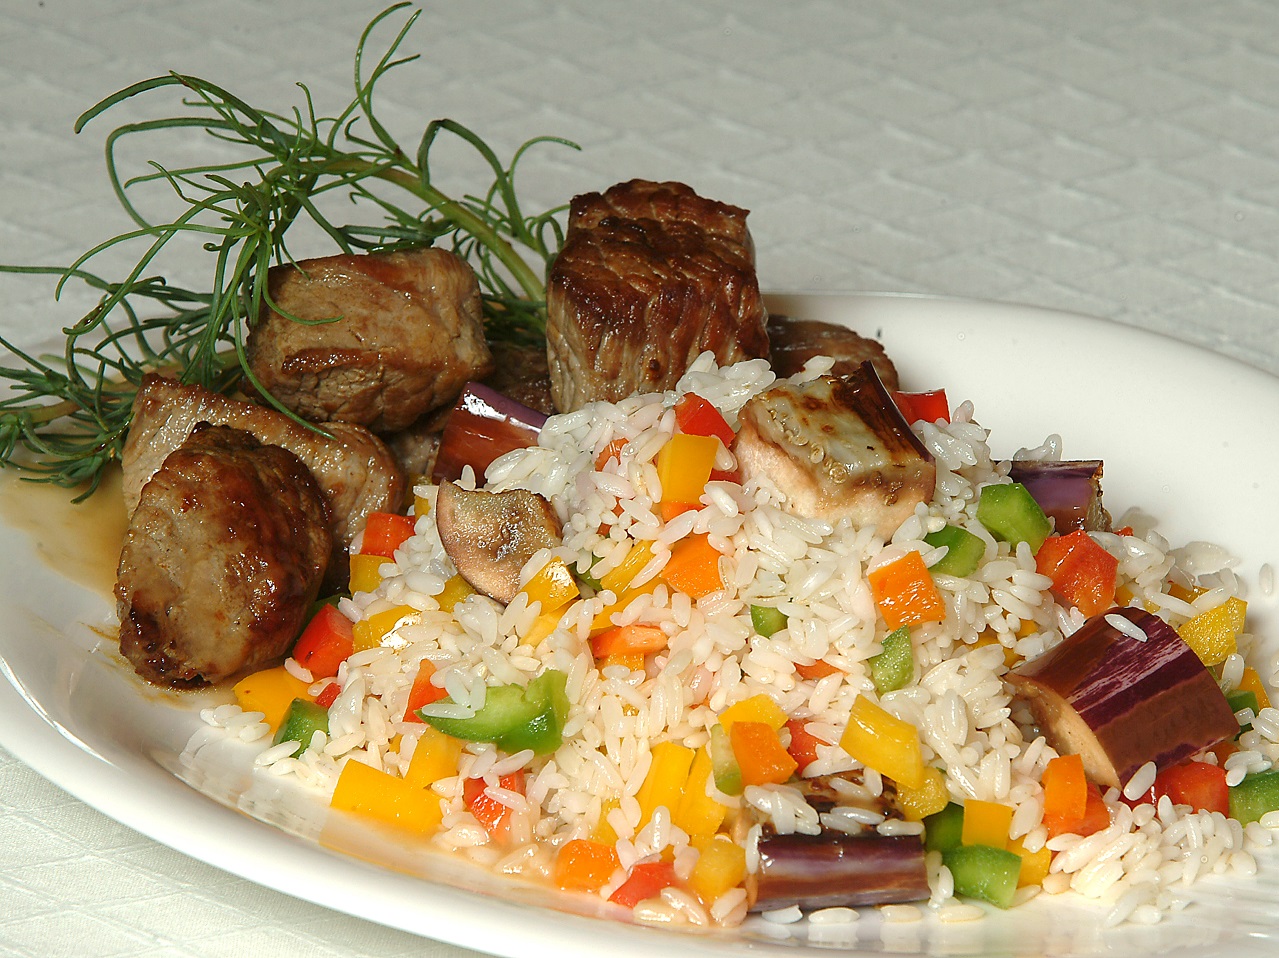 Rice with beef and vegetables